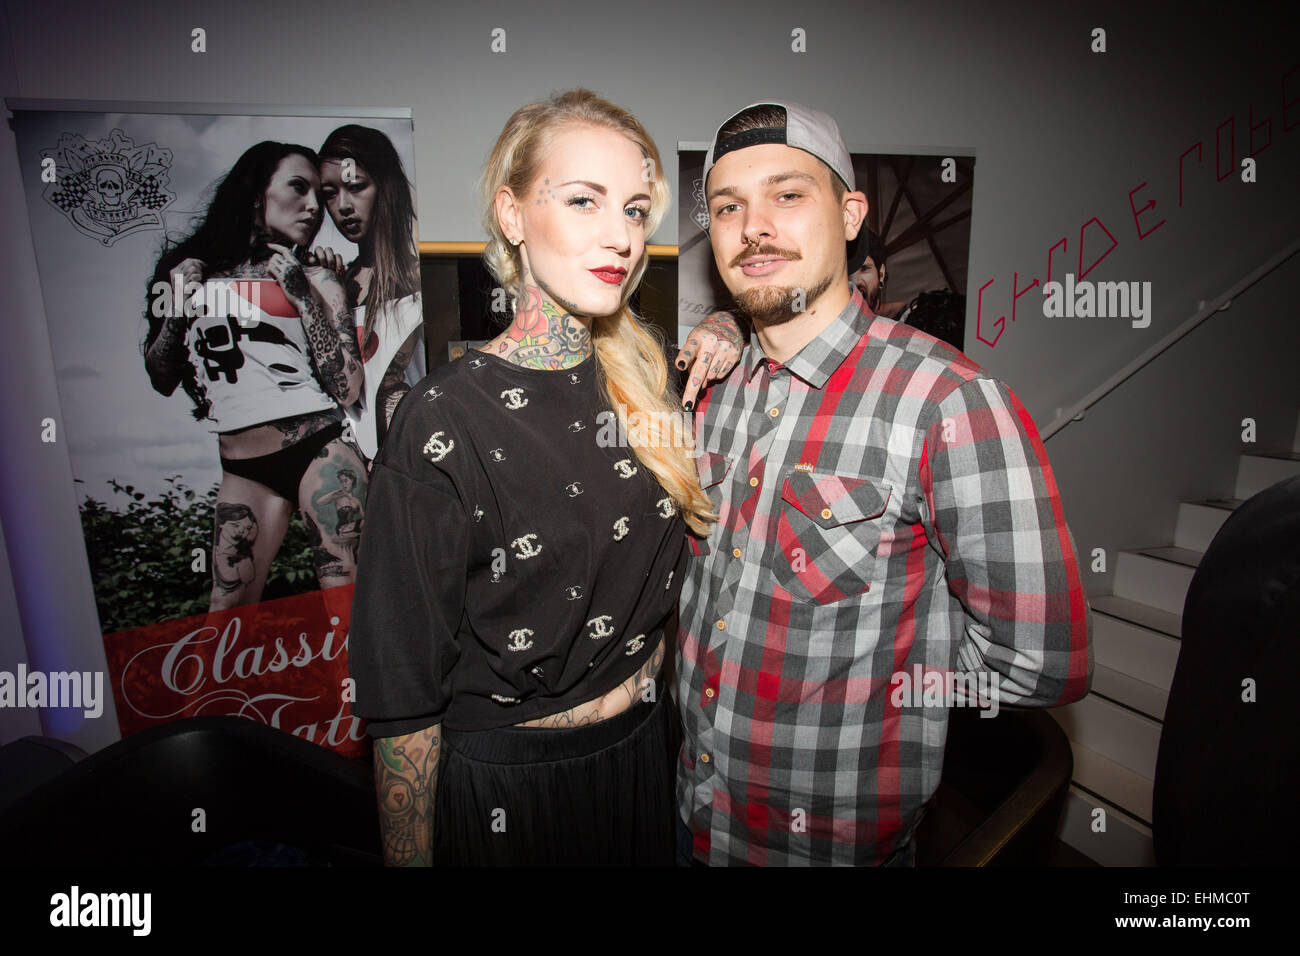 2nd True Berlin party at Shan's Kitchen Featuring: classic tattoo,Guest Where: Berlin, Germany When: 09 Sep 2014 Stock Photo